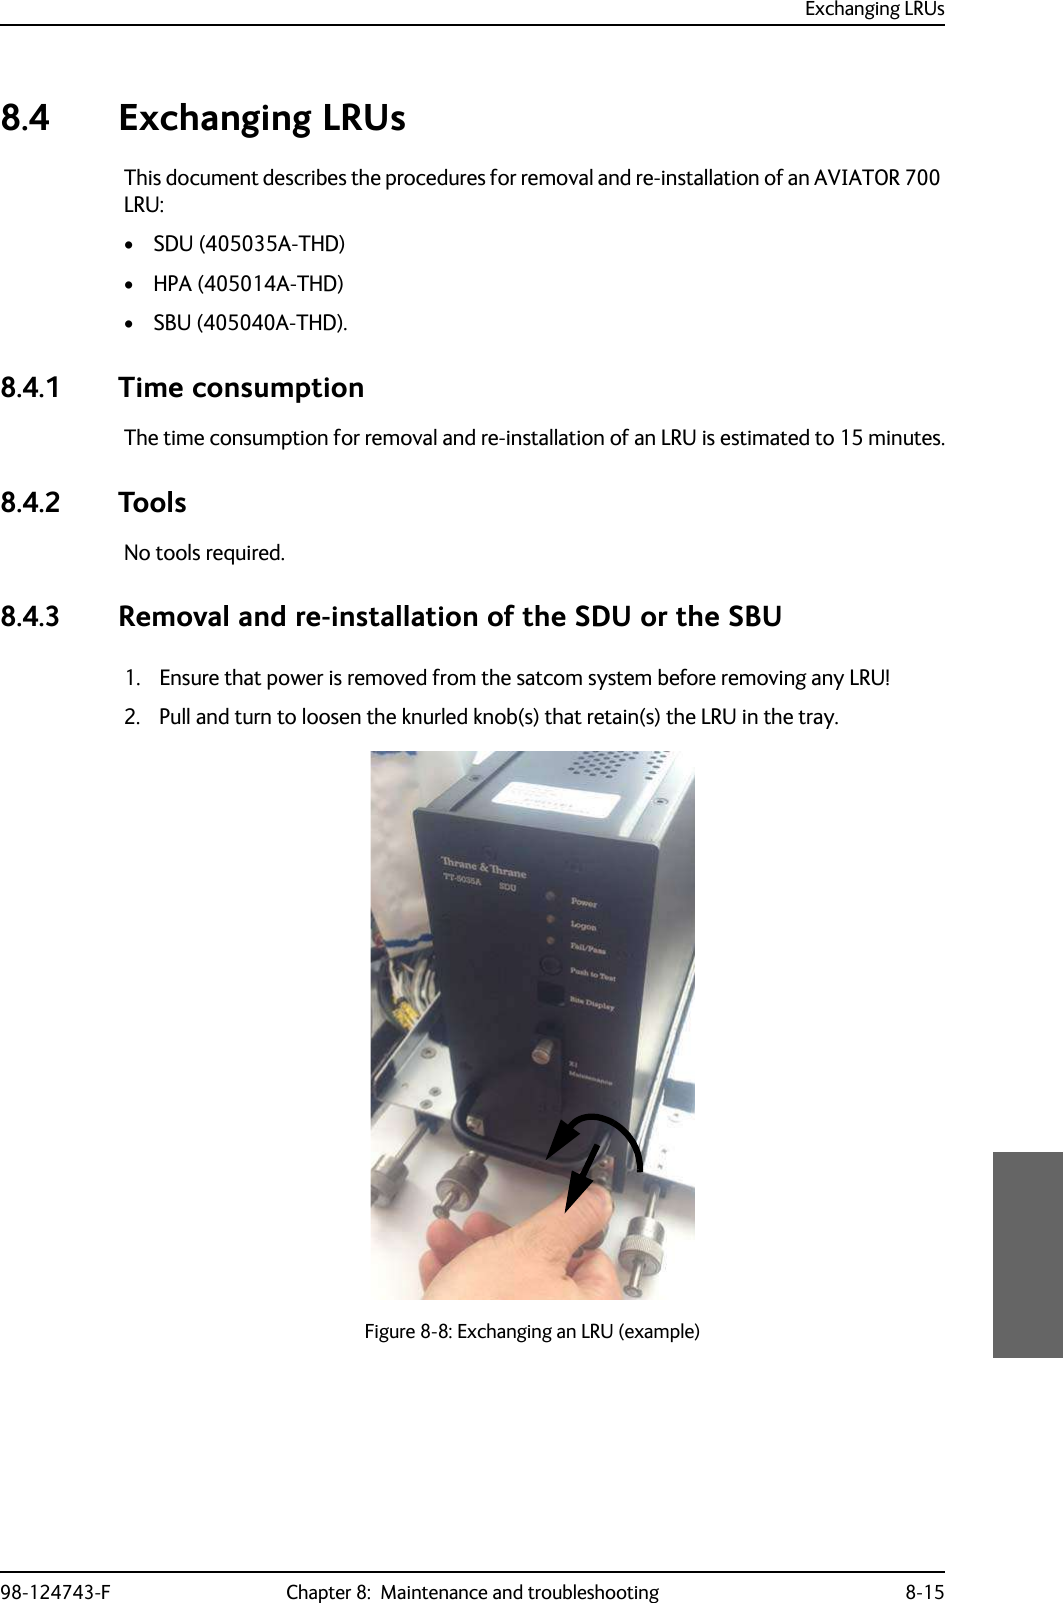 Exchanging LRUs98-124743-F Chapter 8:  Maintenance and troubleshooting 8-158.4 Exchanging LRUsThis document describes the procedures for removal and re-installation of an AVIATOR 700 LRU:• SDU (405035A-THD)• HPA (405014A-THD)• SBU (405040A-THD).8.4.1 Time consumptionThe time consumption for removal and re-installation of an LRU is estimated to 15 minutes.8.4.2 ToolsNo tools required.8.4.3 Removal and re-installation of the SDU or the SBU1. Ensure that power is removed from the satcom system before removing any LRU!2. Pull and turn to loosen the knurled knob(s) that retain(s) the LRU in the tray.Figure 8-8: Exchanging an LRU (example)